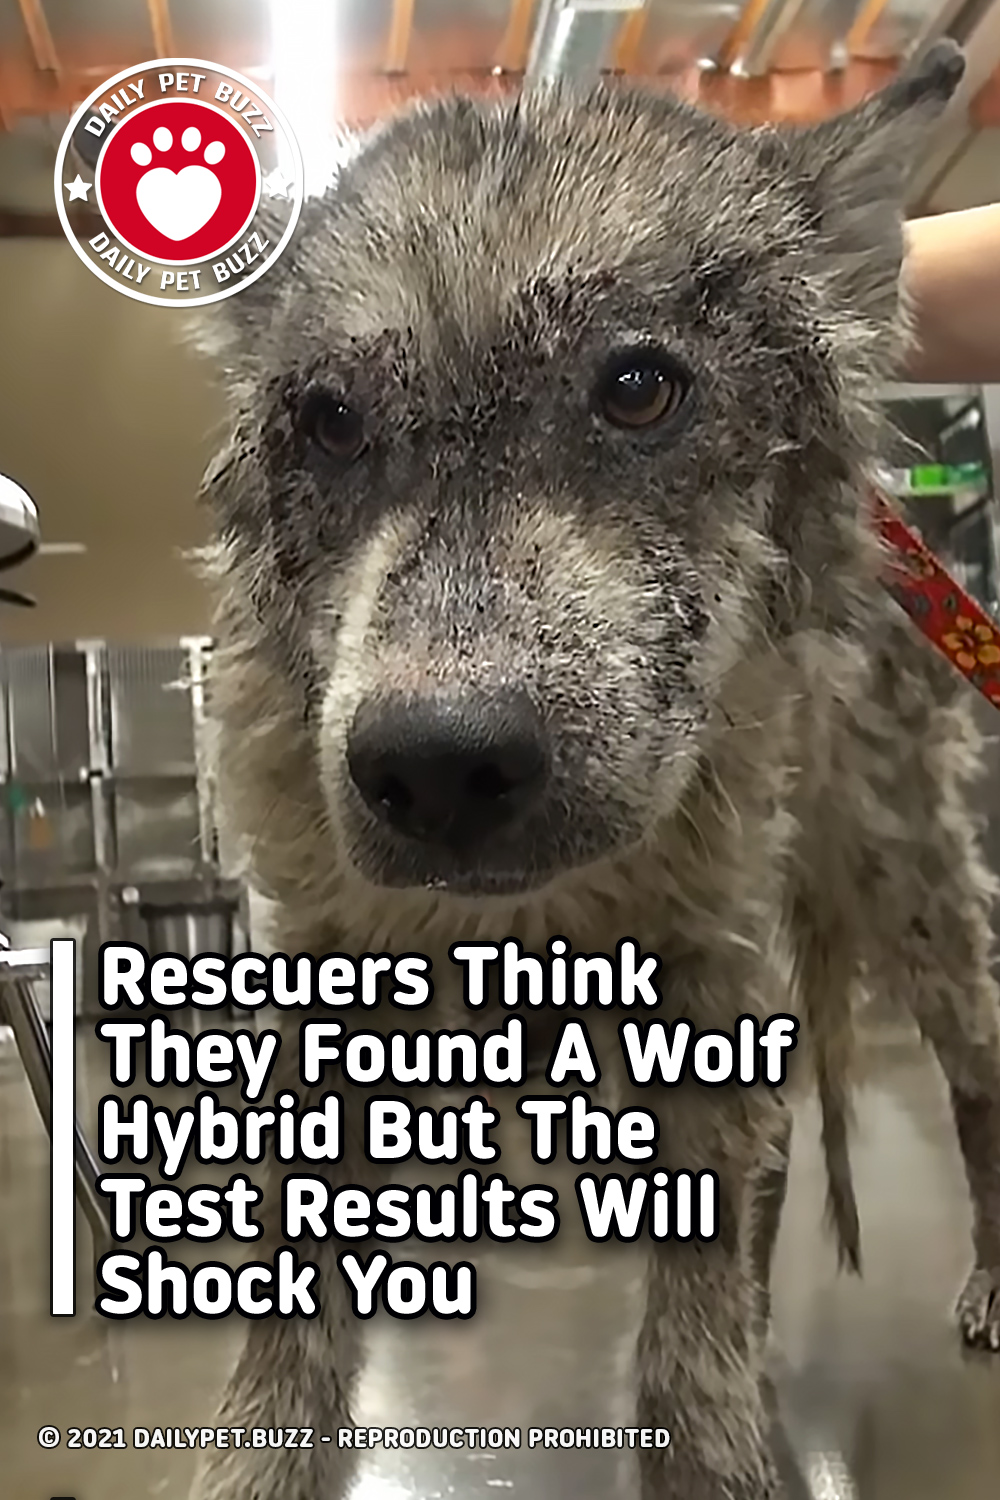 Rescuers Think They Found A Wolf Hybrid But The Test Results Will Shock You